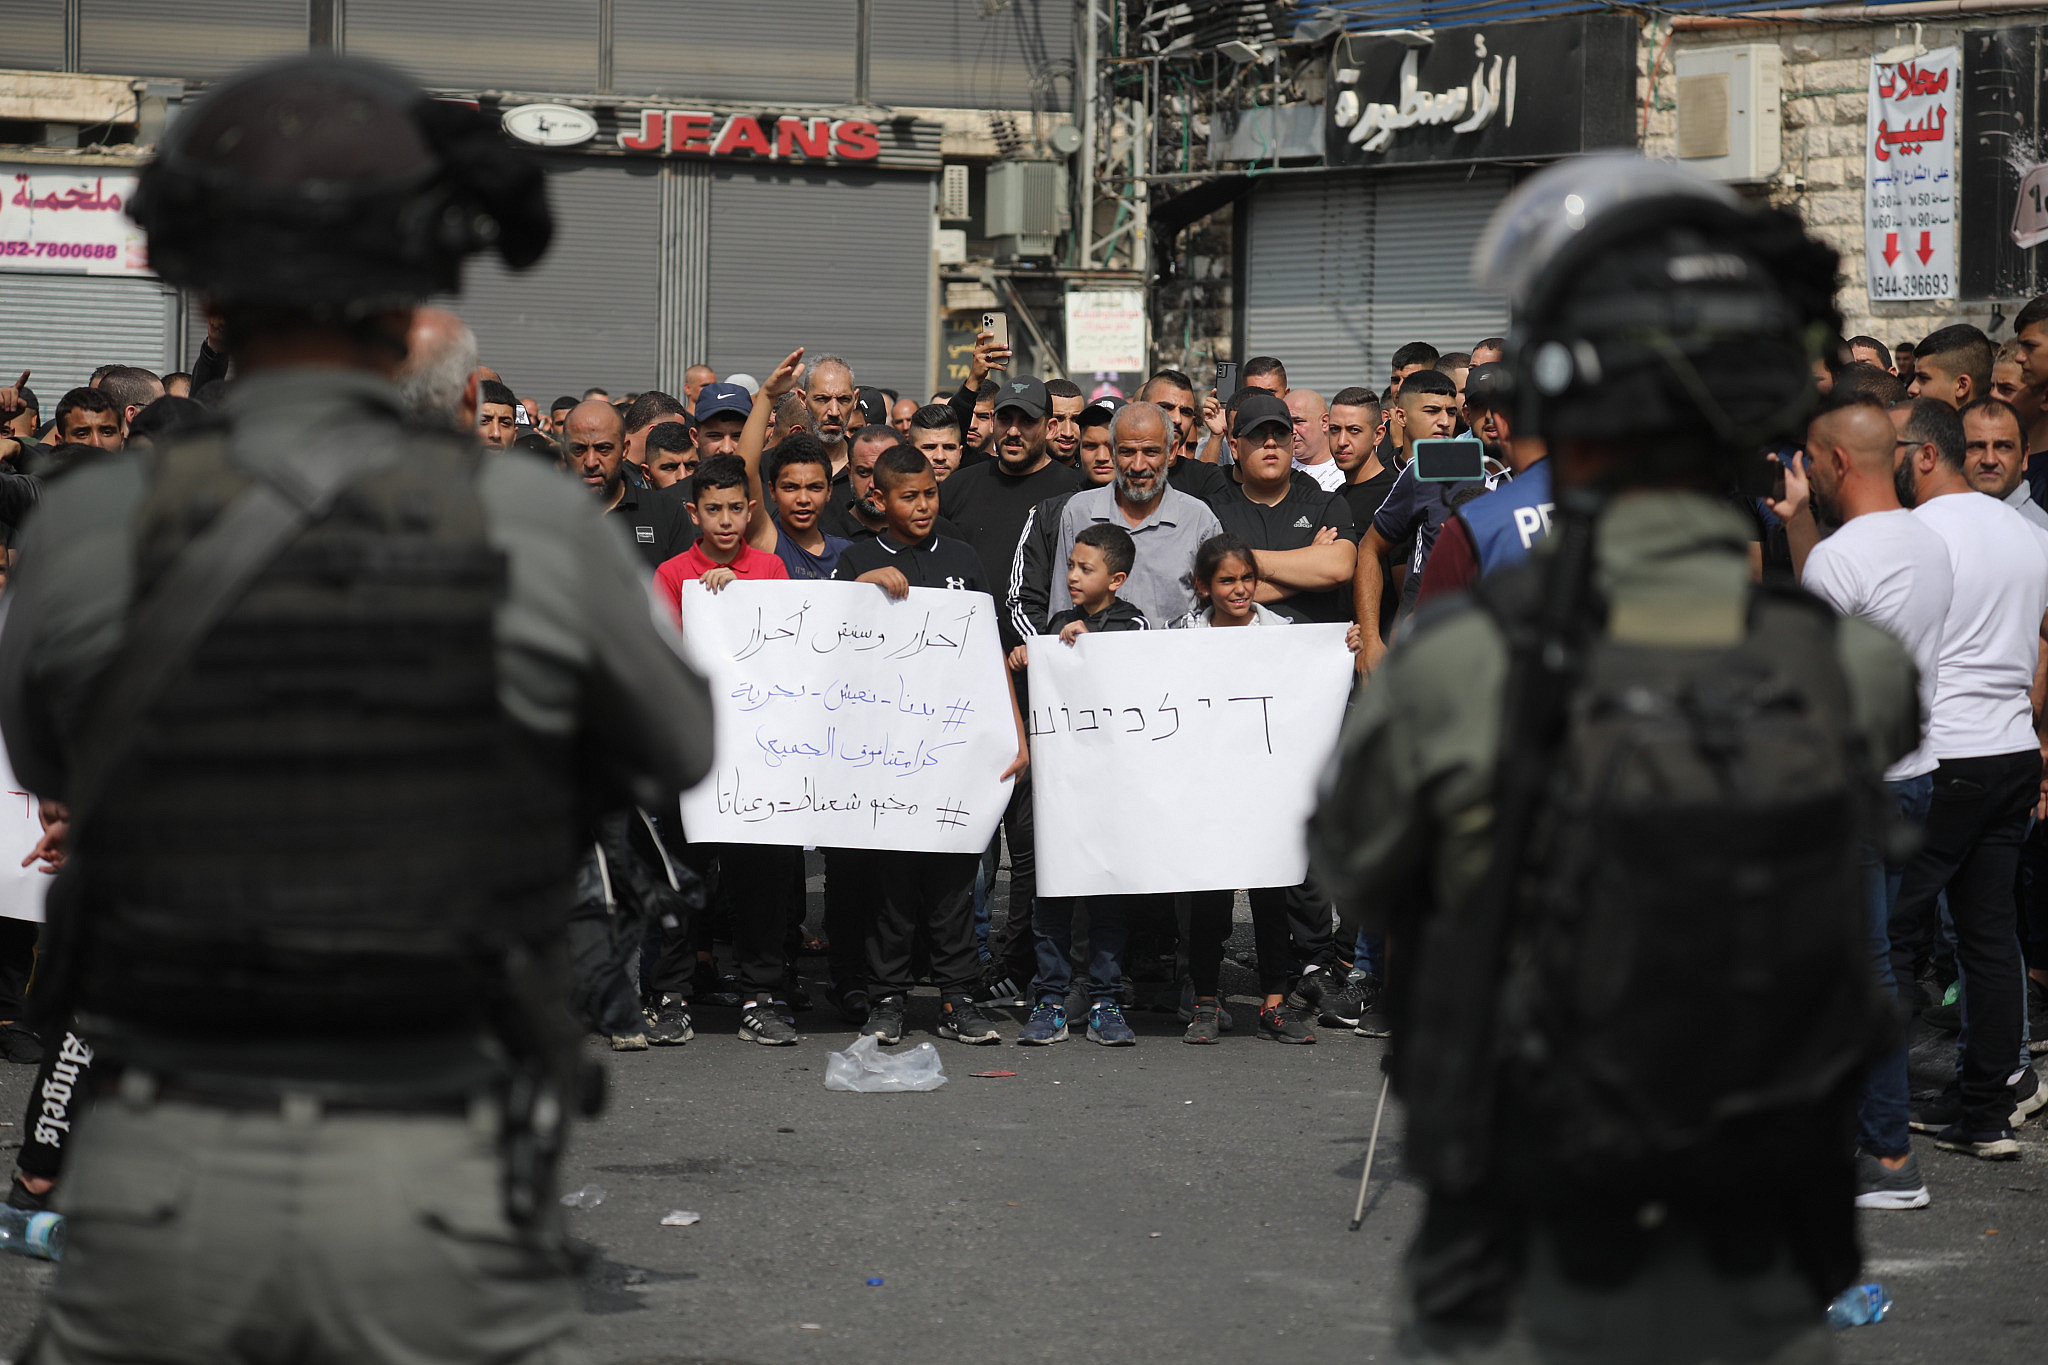 Israeli police stand opposite Palestinians in Shuafat Refugee Camp as they protest a days-long lockdown imposed by Israel, occupied East Jerusalem, October 12, 2022. (Oren Ziv/Activestills)